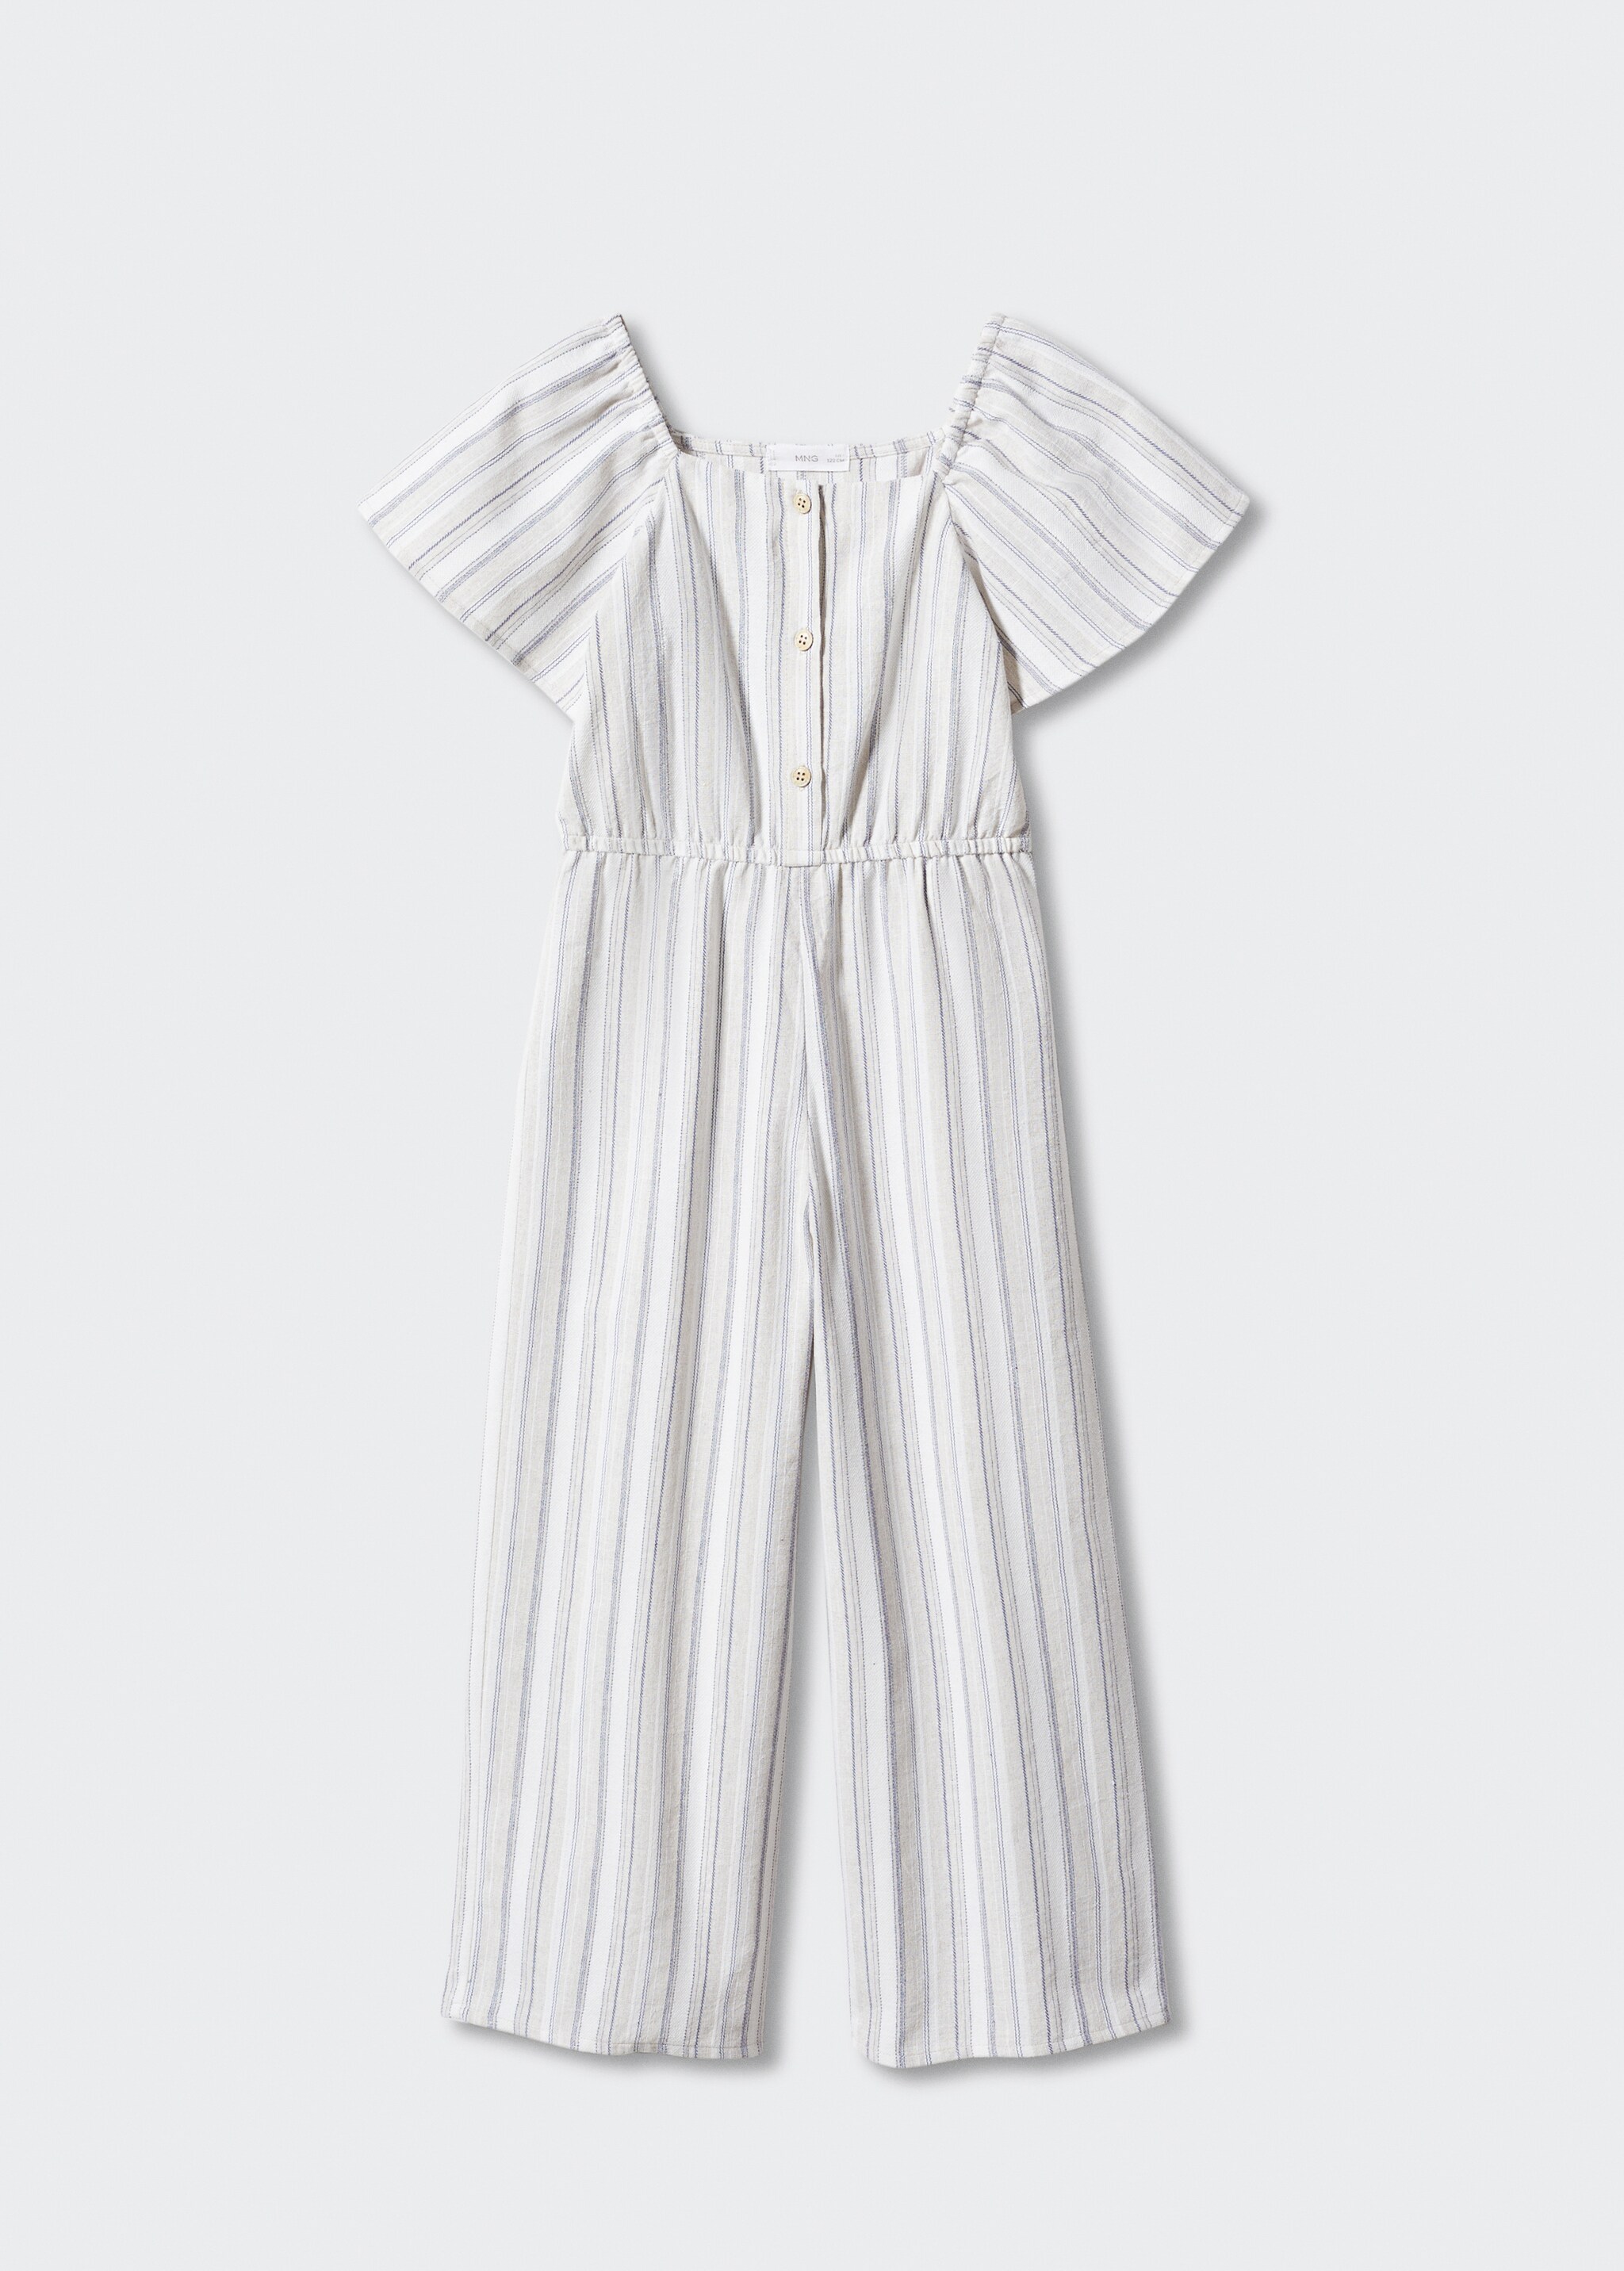 Striped cotton jumpsuit - Article without model